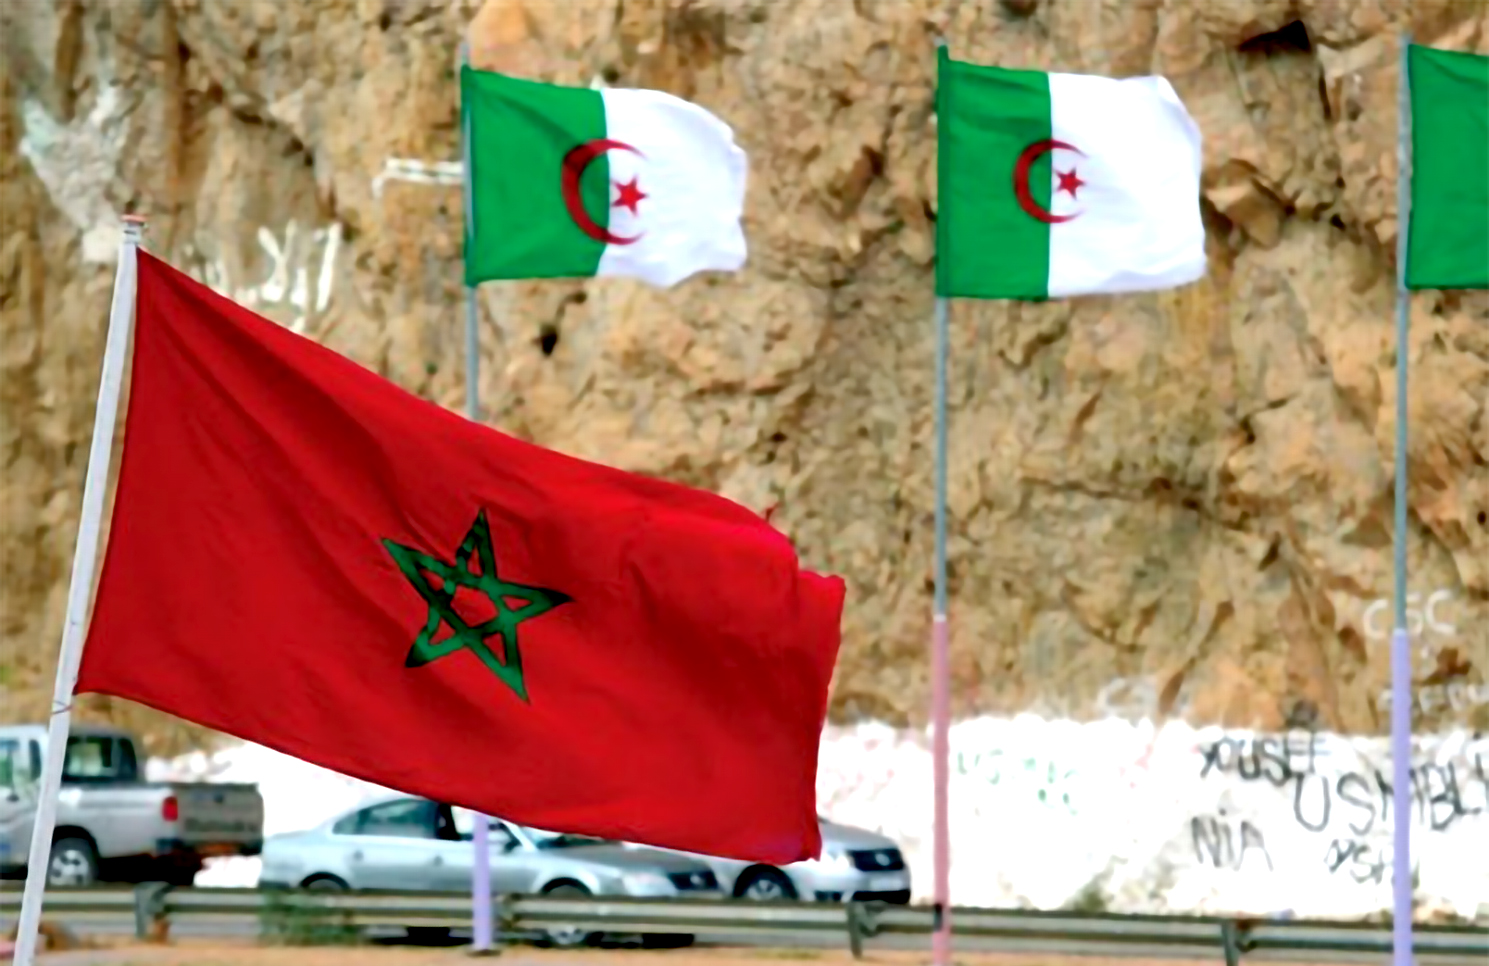 Morocco's Foreign Ministry plans to summon Algeria's Ambassador to Morocco according to credible sources.